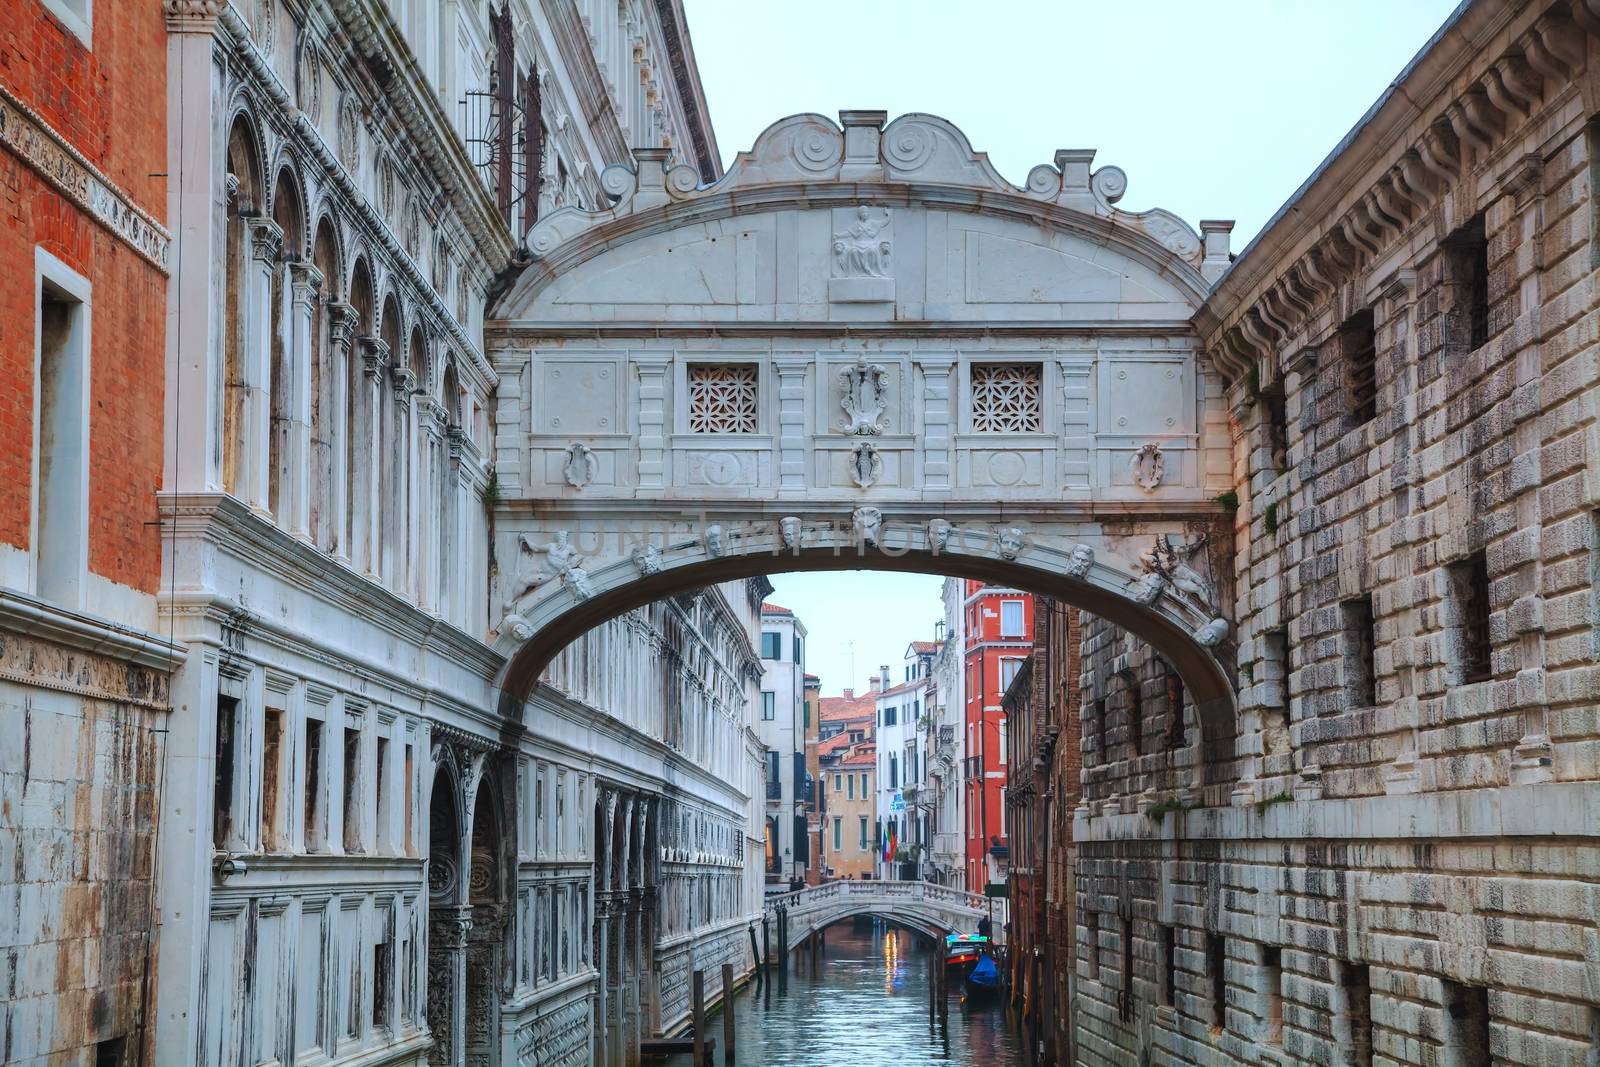 Bridge of sighs in Venice, Italy at the sunrise